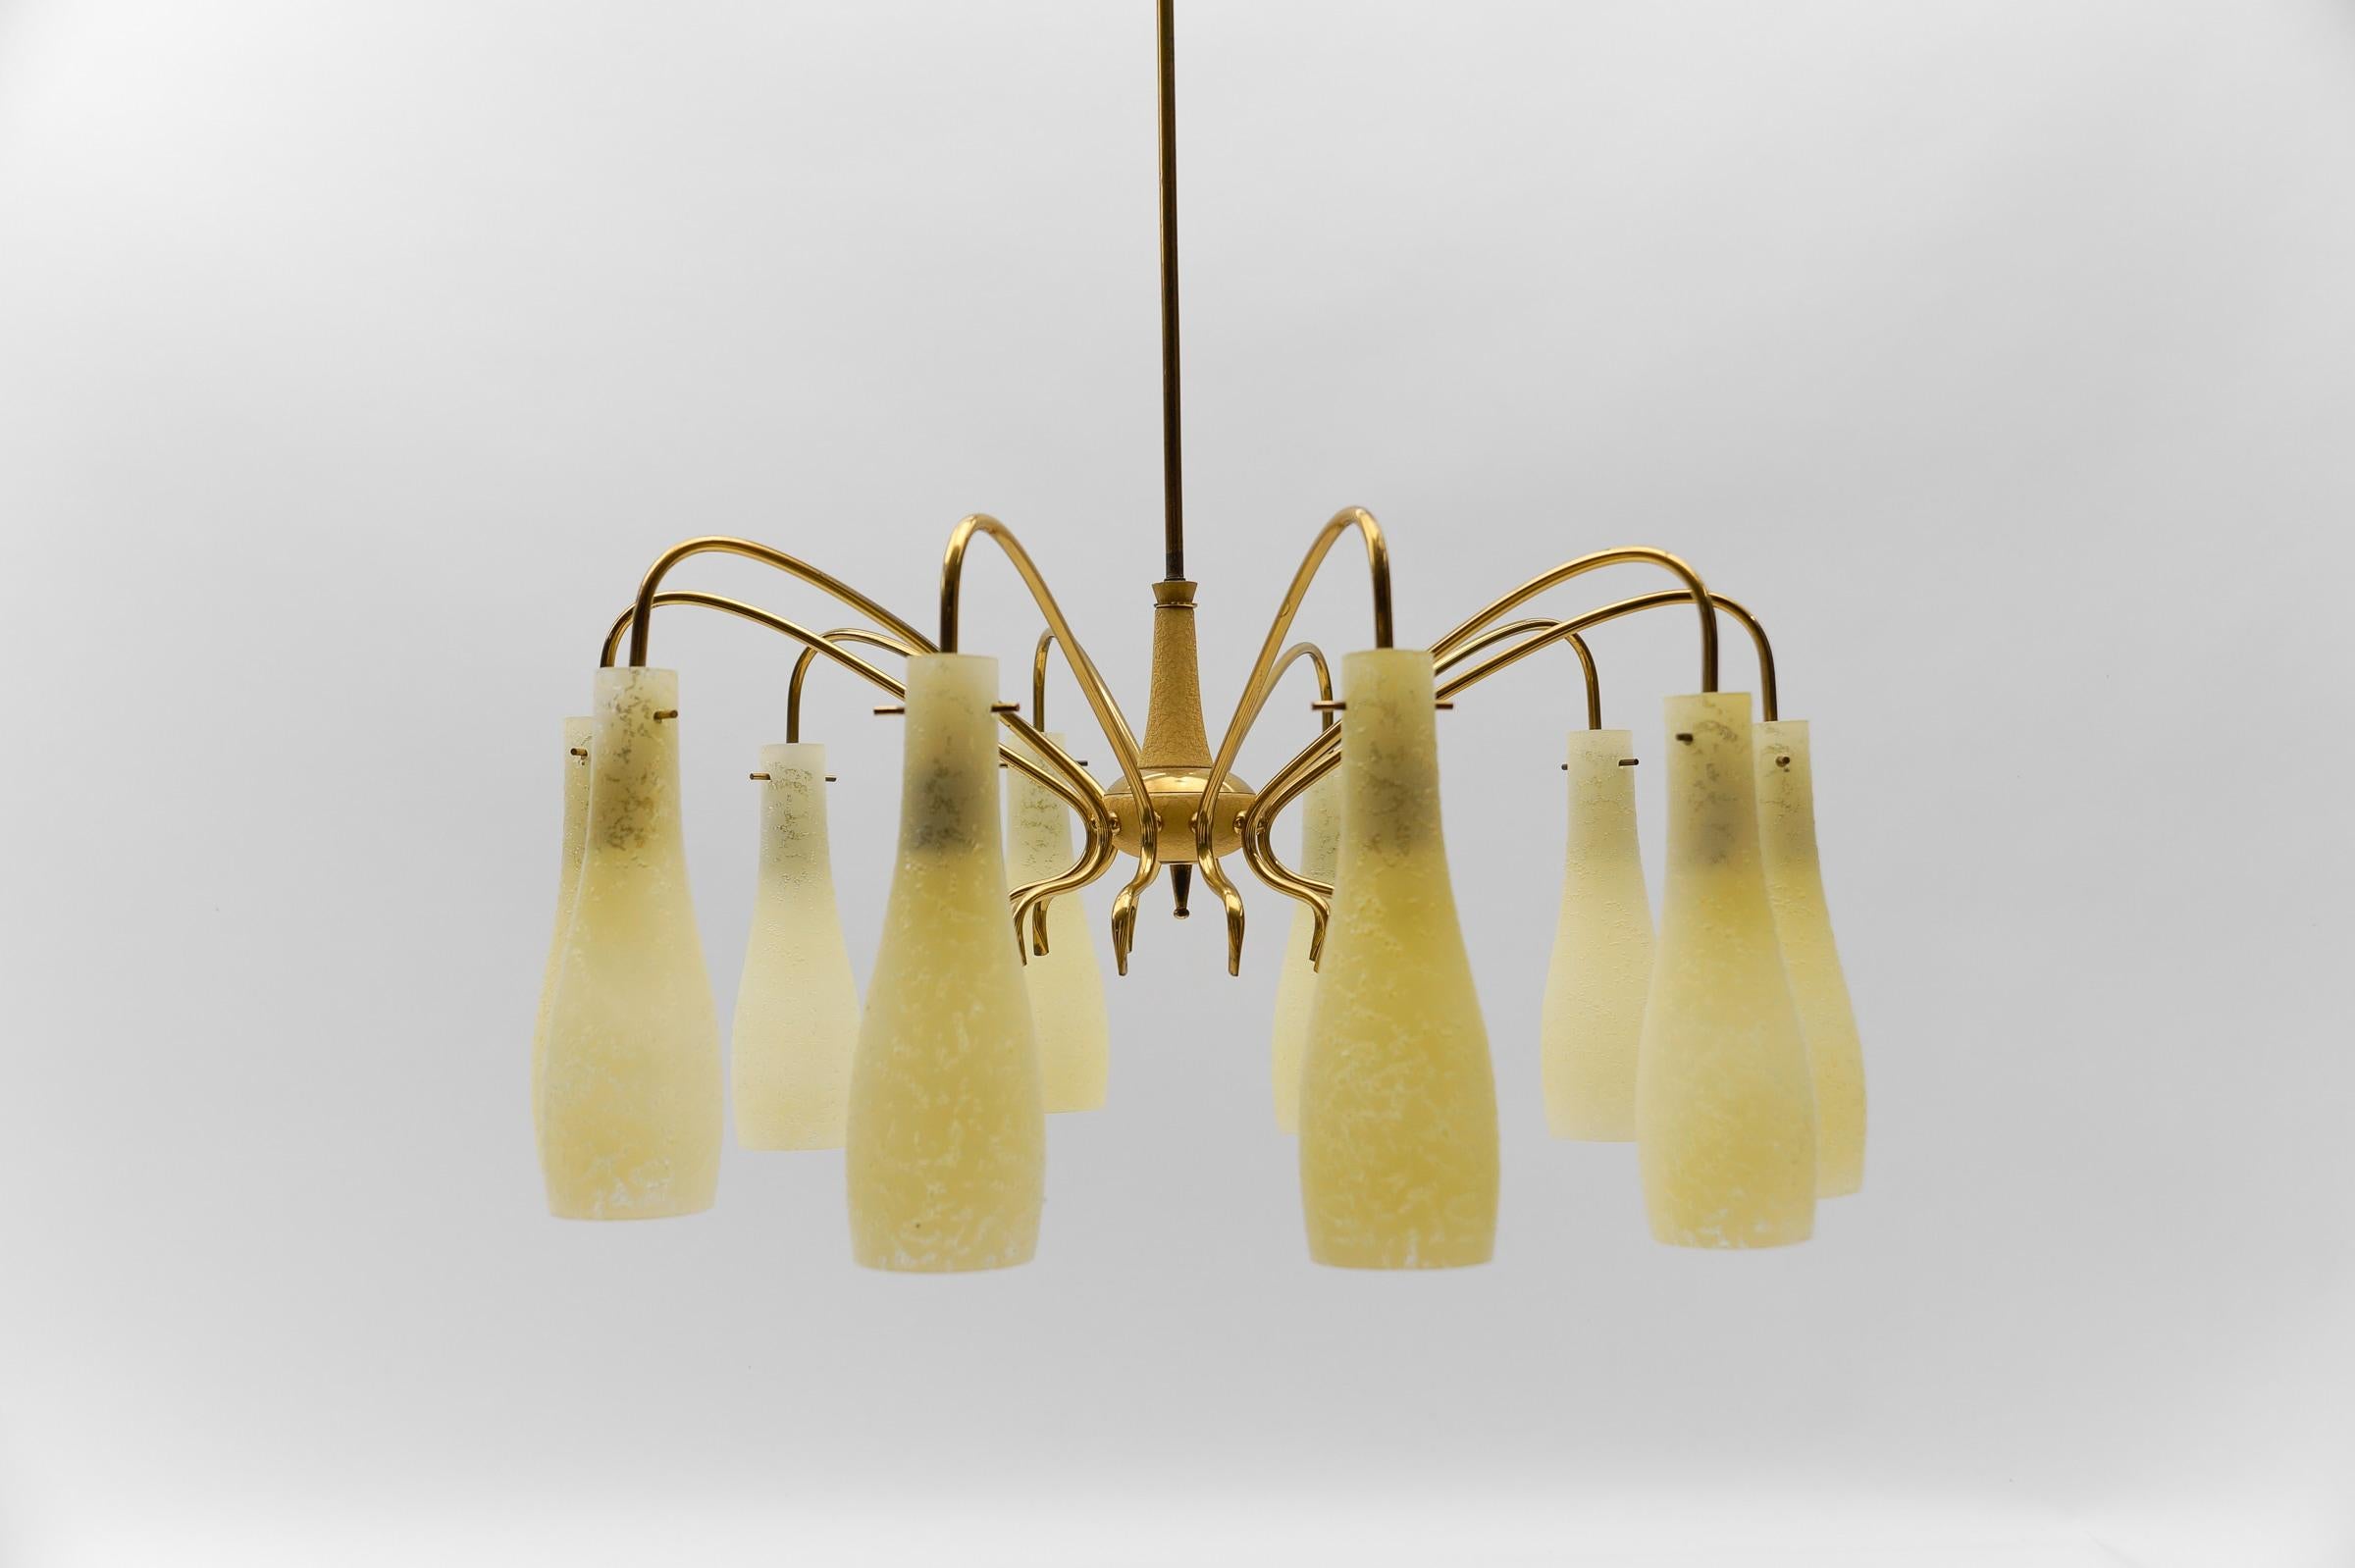 Mid-20th Century Brass & Glass Sputnik Chandelier with 10 Lights, 1950s Italy For Sale